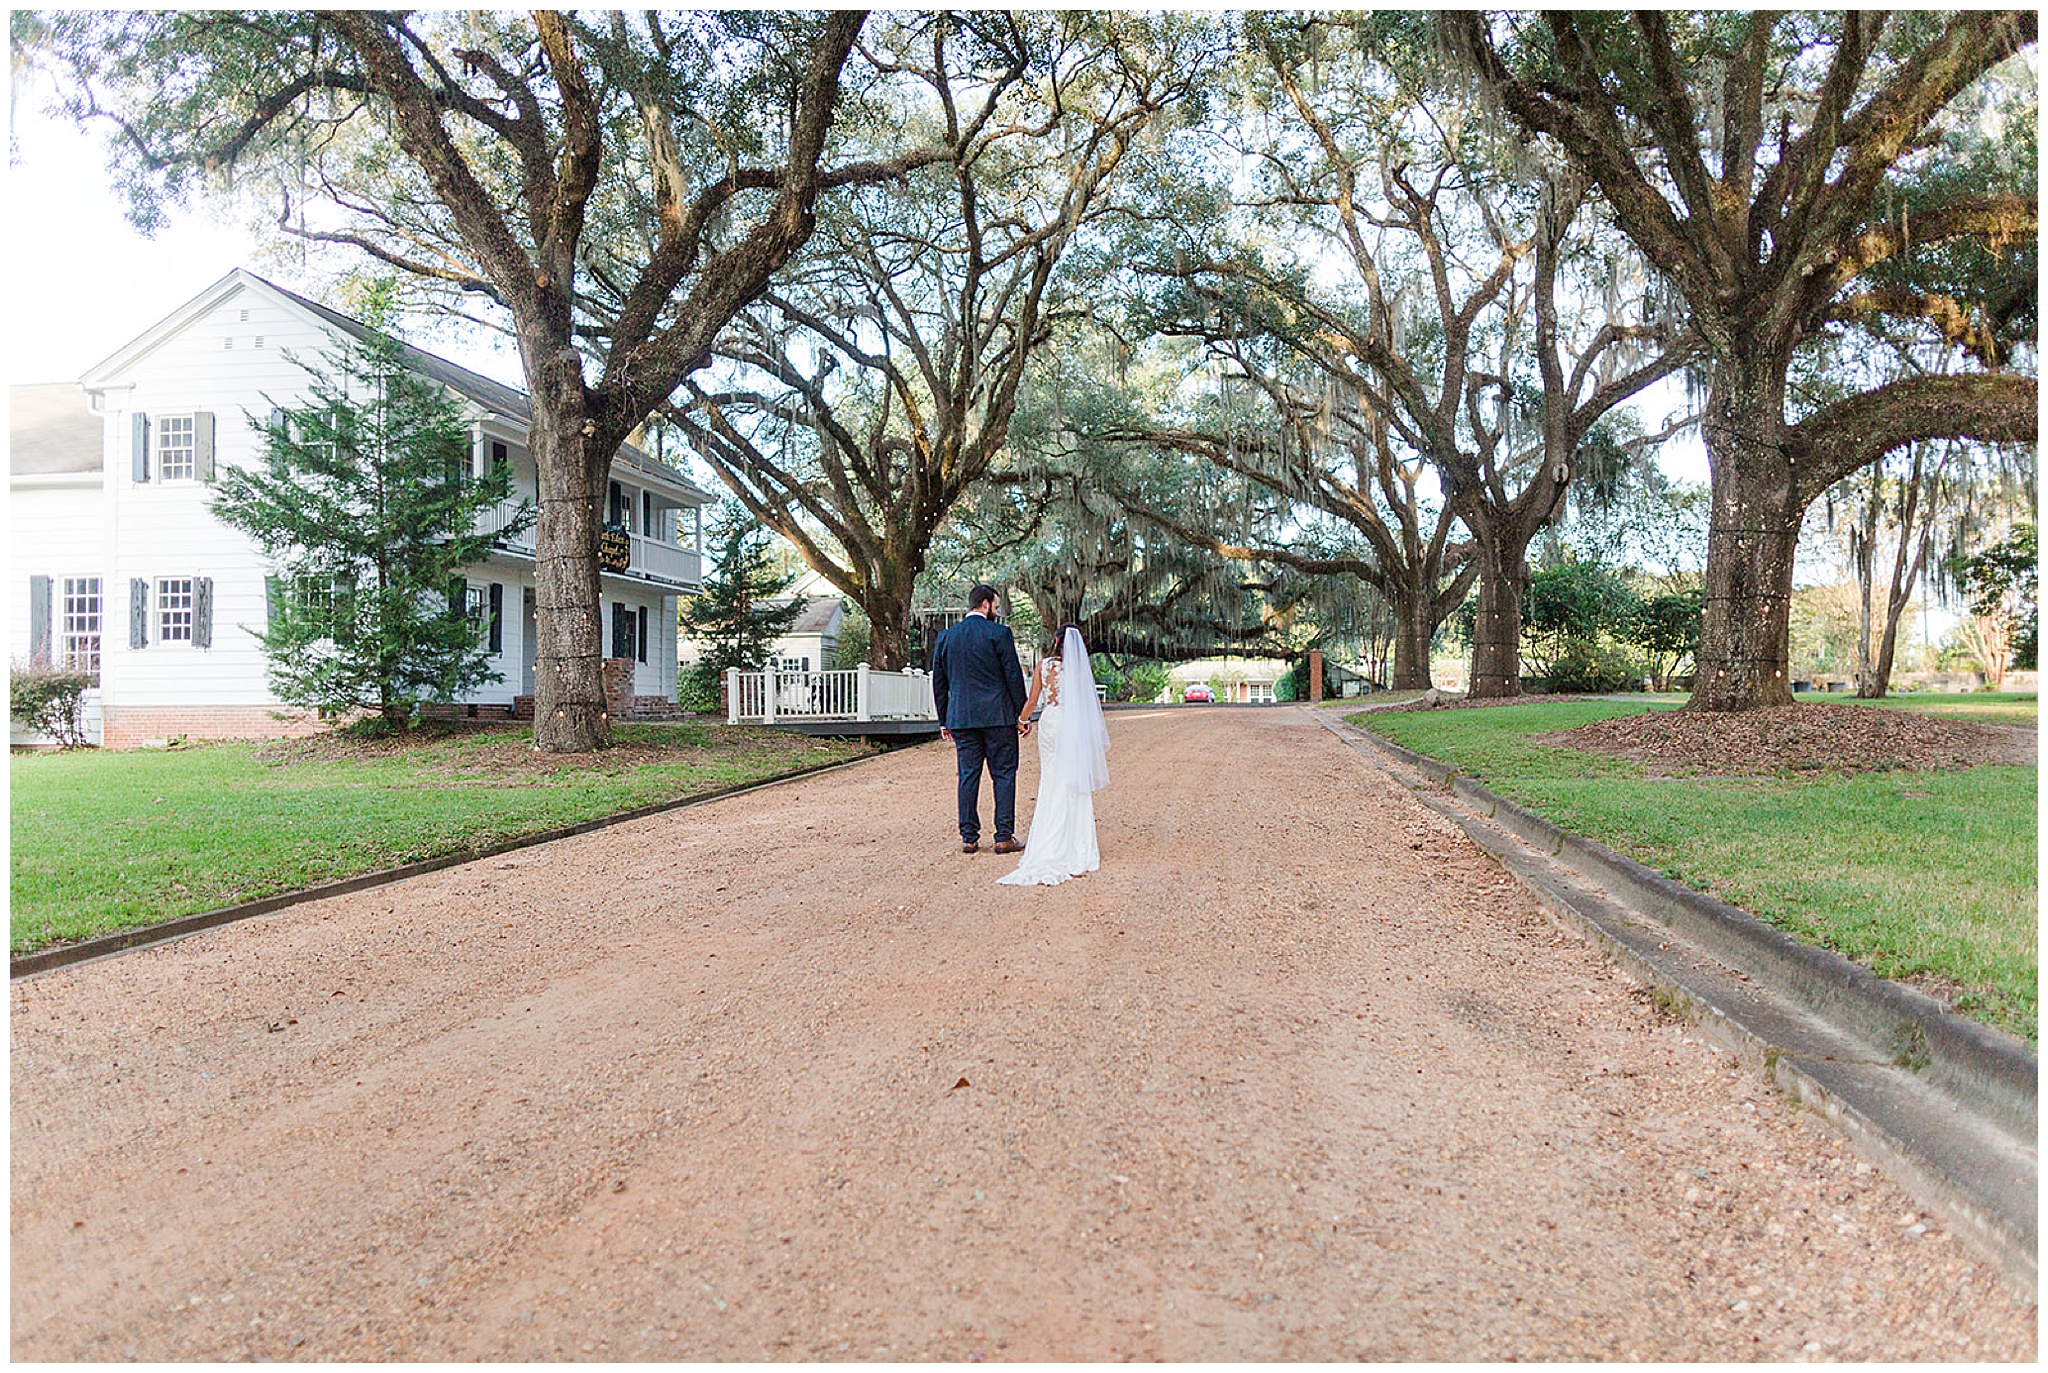 Newlyweds walk down an unpaved road to the plantation house surrounded by oak trees